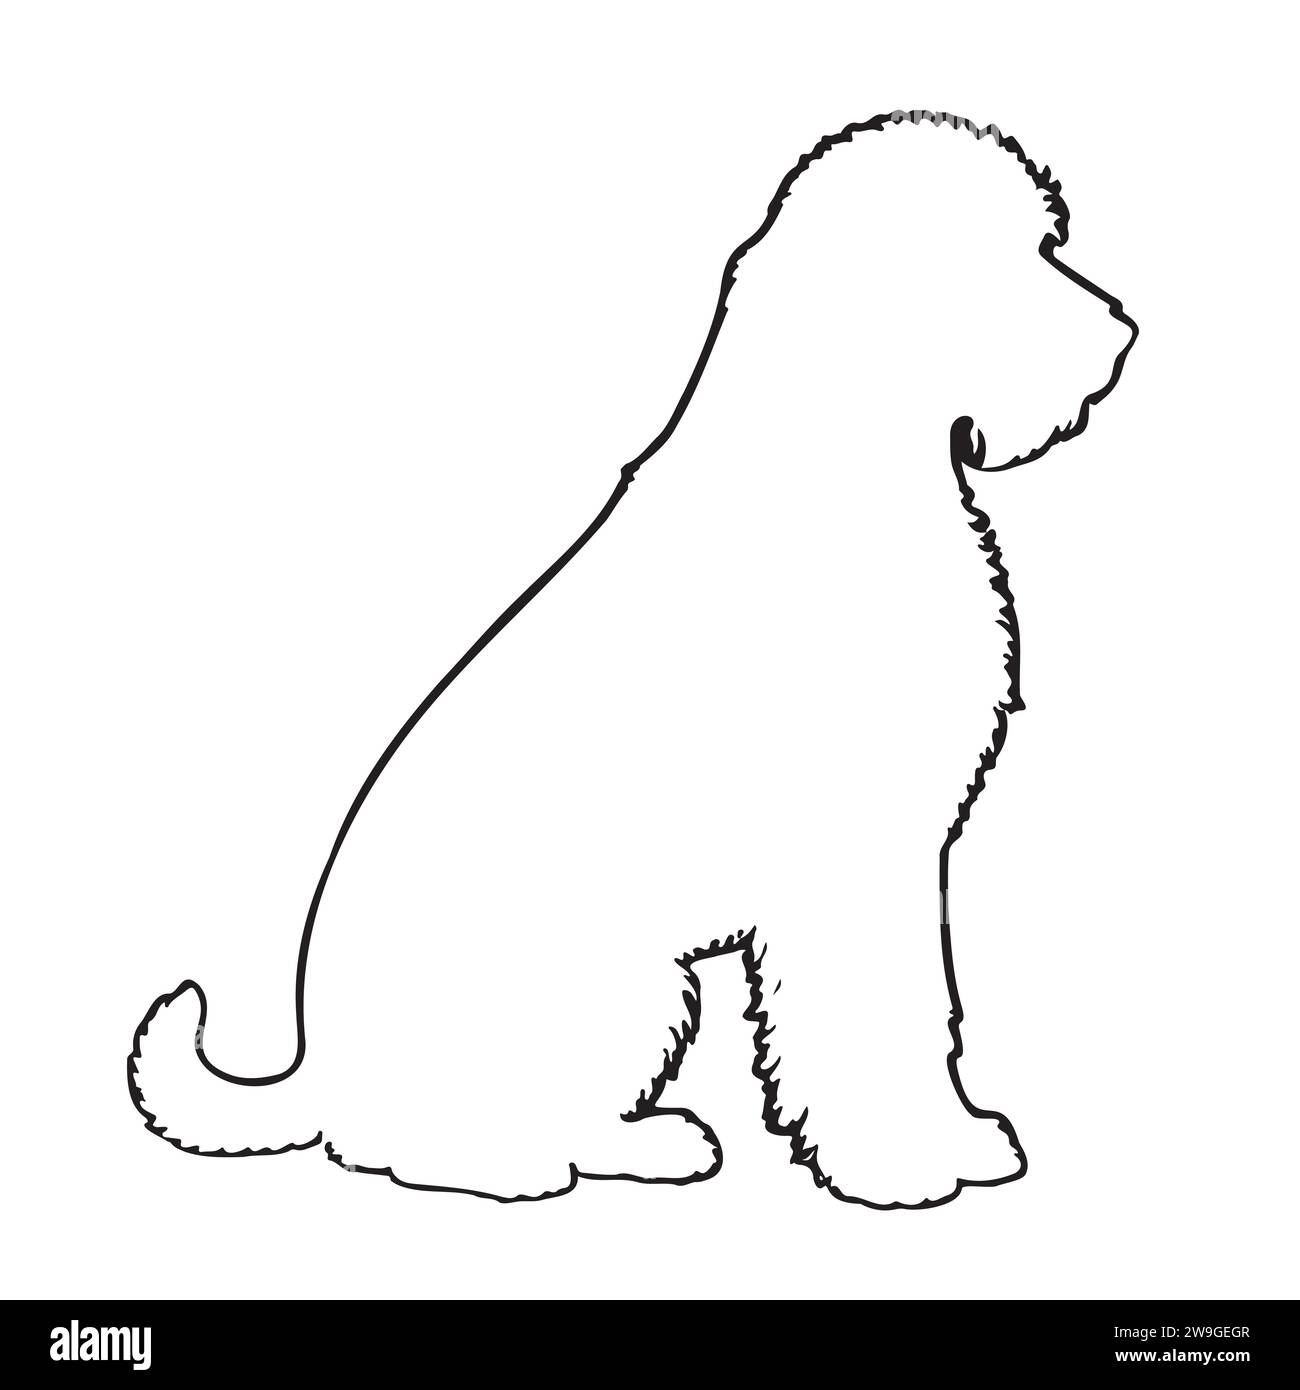 Black silhouette of a dog isolated on a white background. Stock Vector